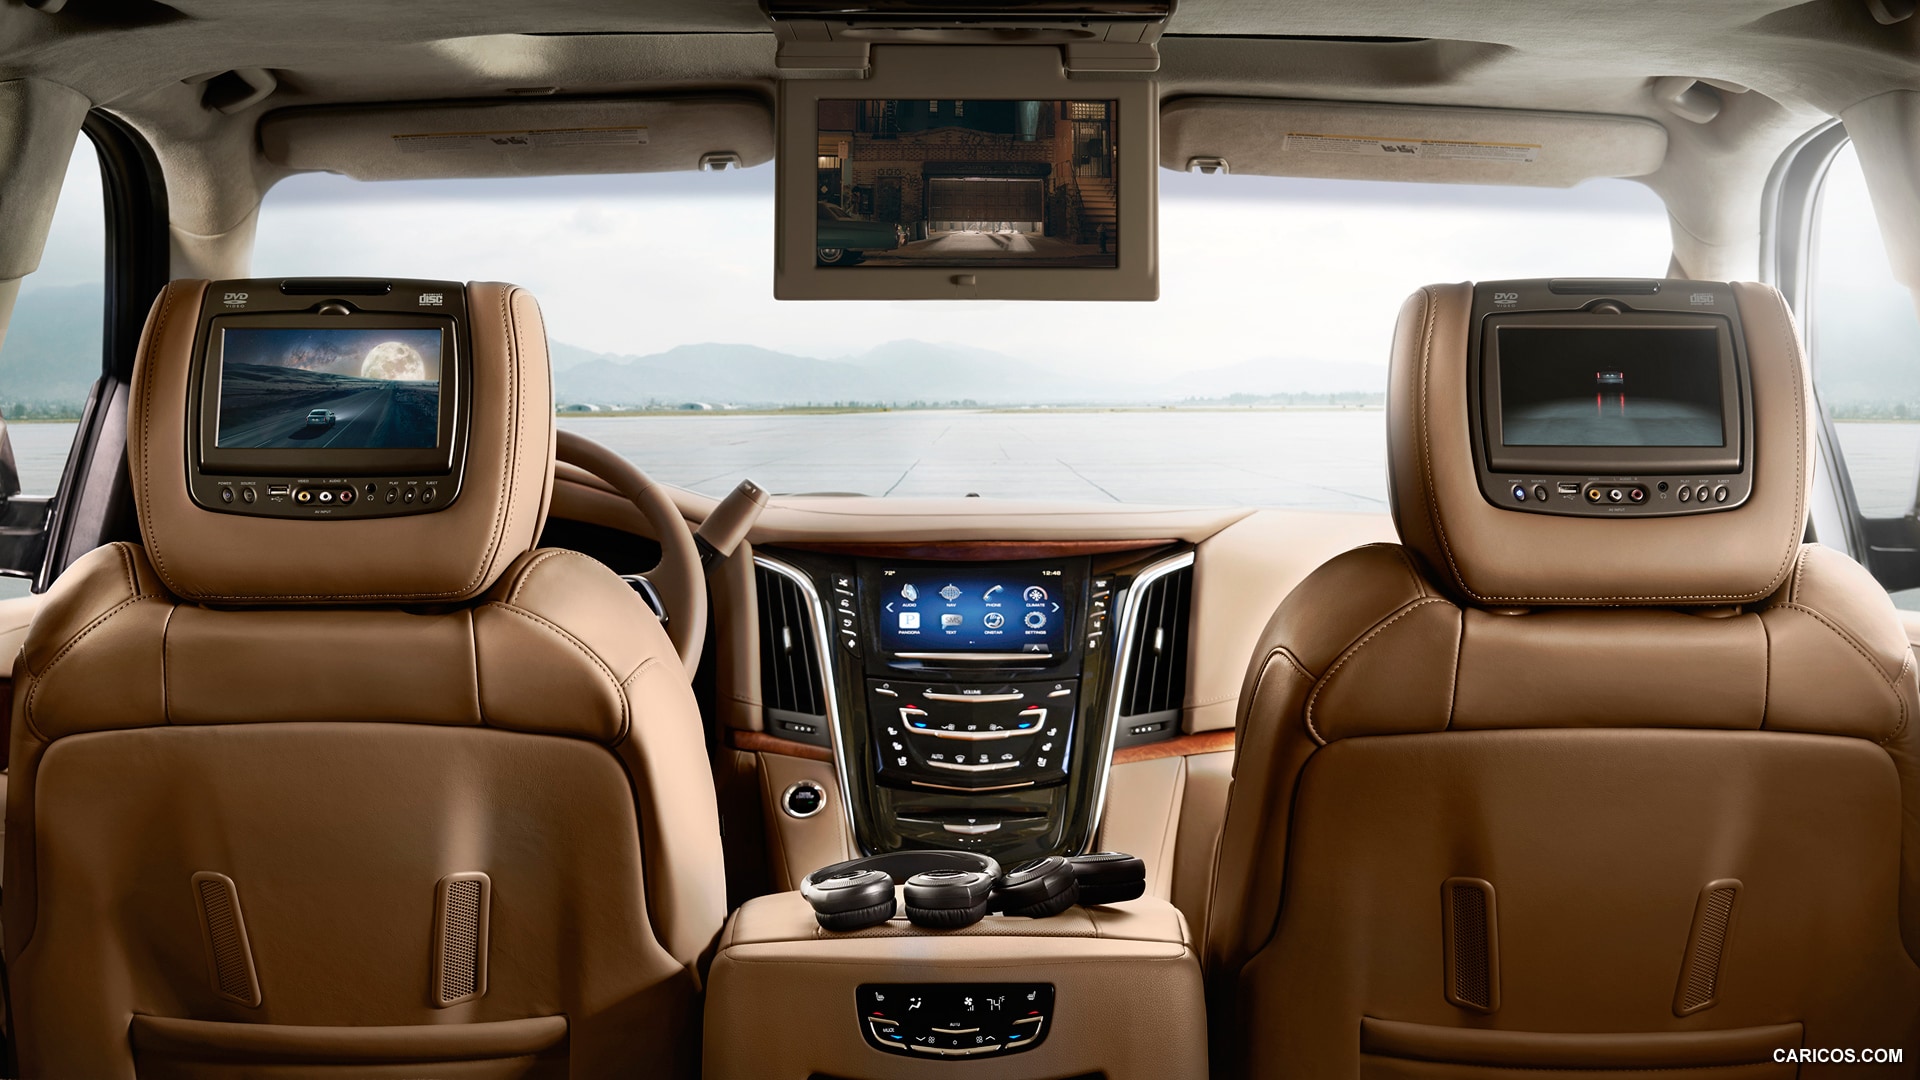 A vehicle featured in Top 5 Cars with Rear Entertainment Systems